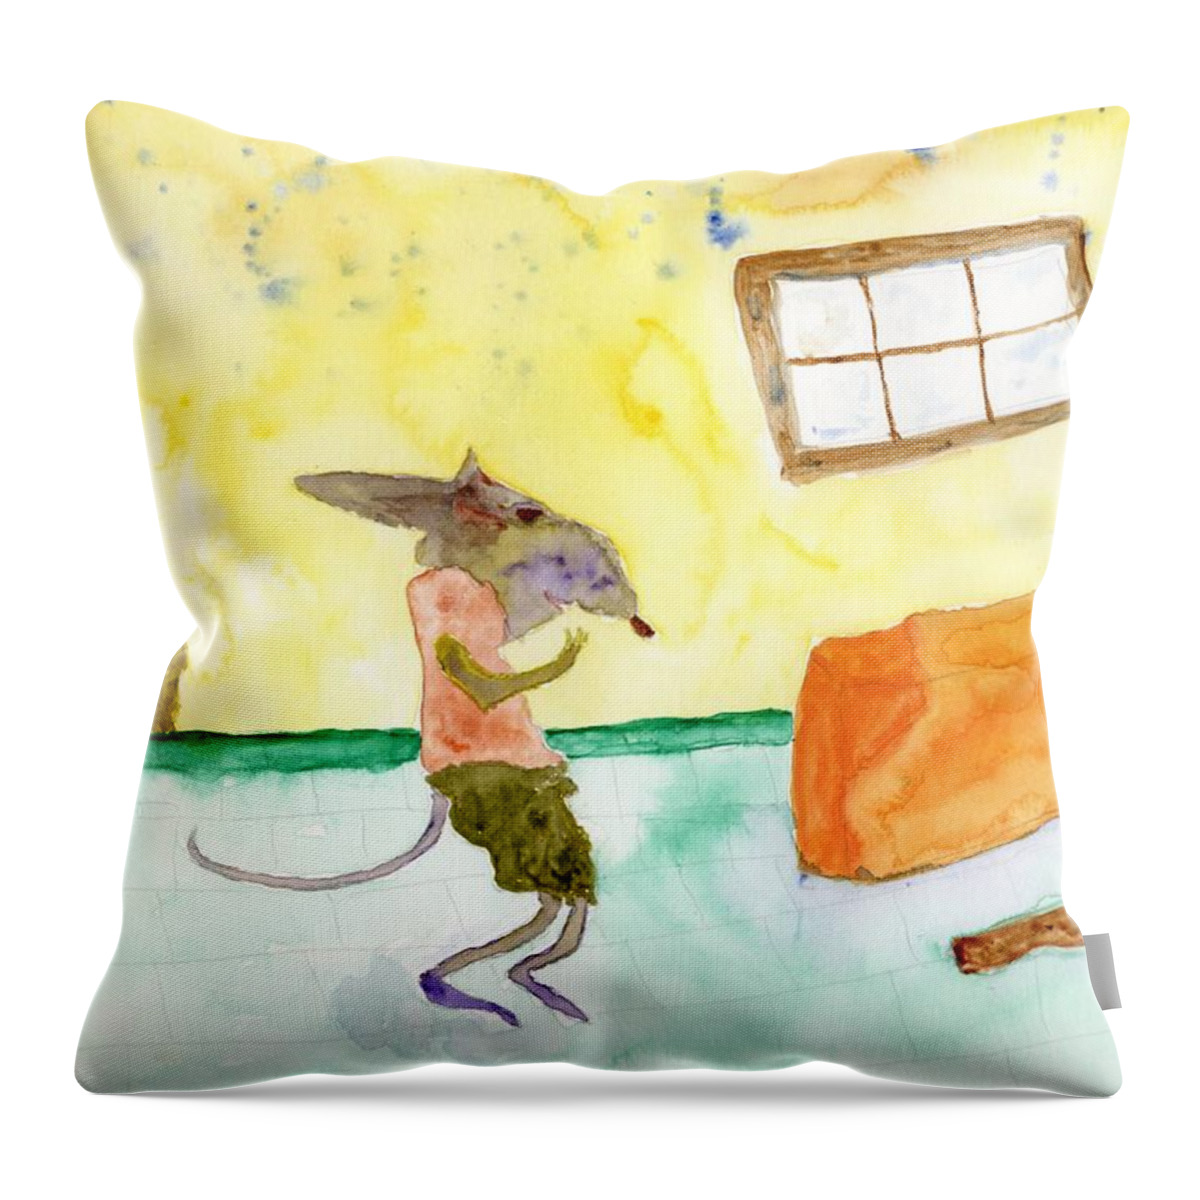 Jim Taylor Throw Pillow featuring the painting Cheeze Thief by Jim Taylor